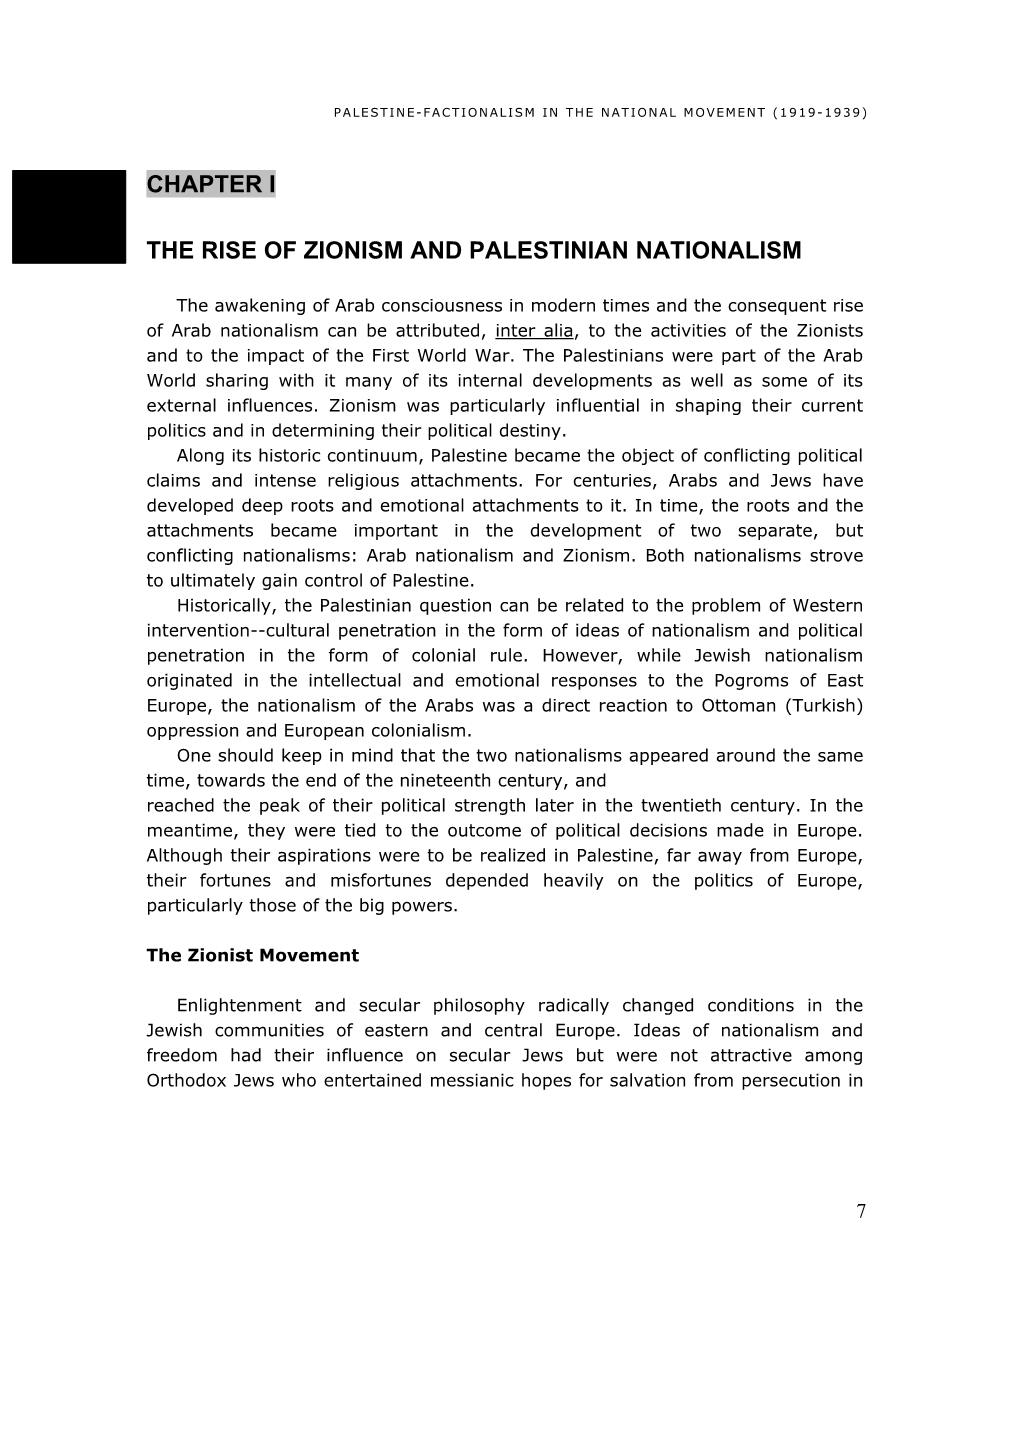 The Rise of Zionism and Palestinian Nationalism